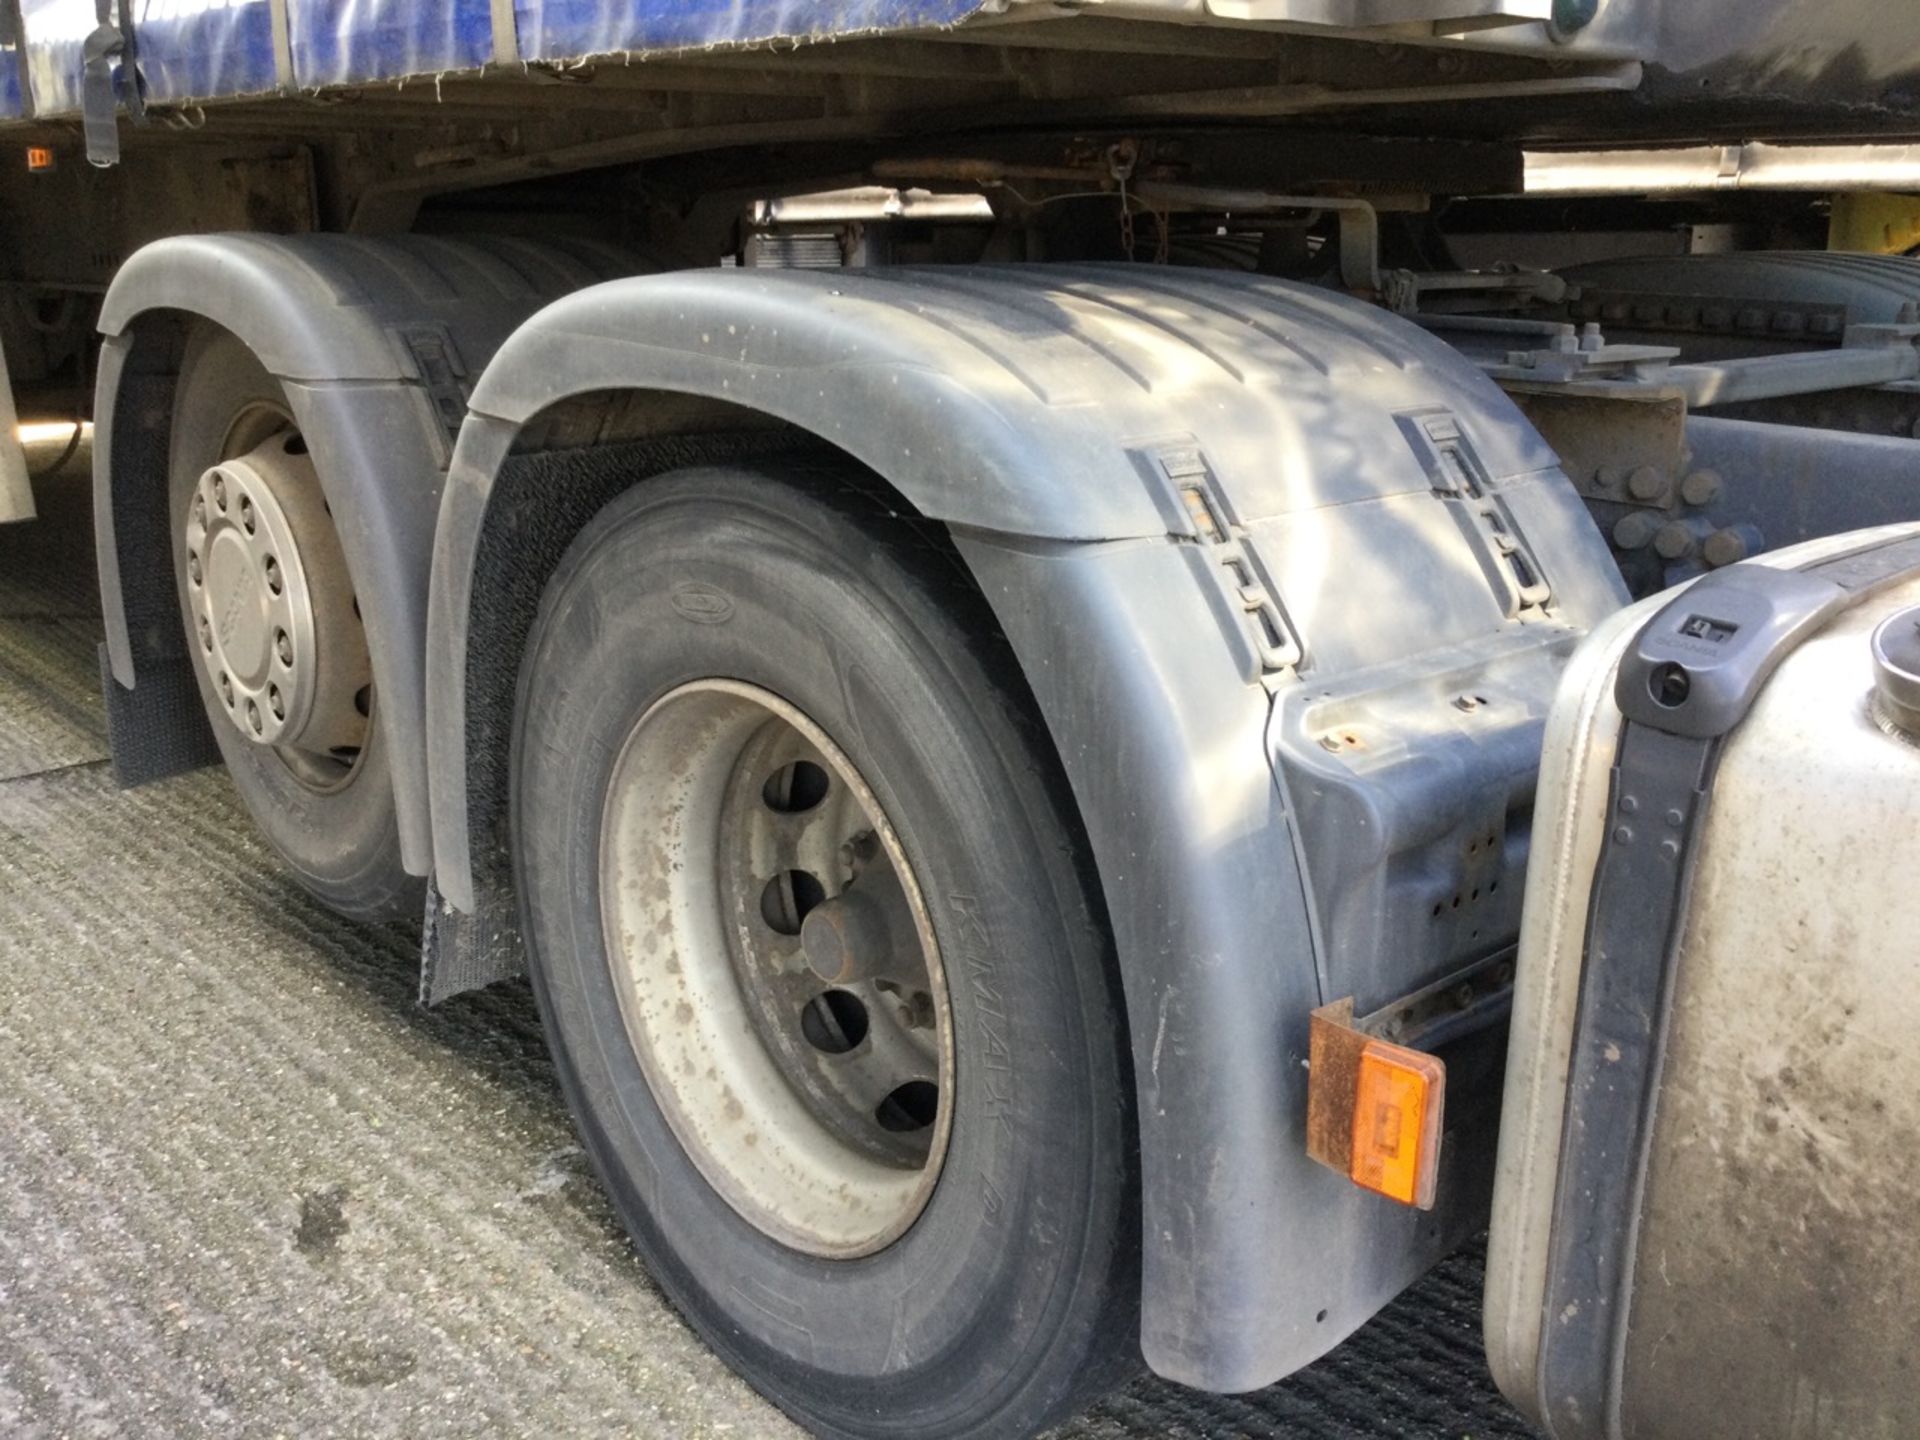 SCANIA R-SRS L-CLASS 6x2 Tractor Unit With Rear Axle Lift, Sleeper Cab. Mot Until 28/02/25. 823314km - Image 3 of 5